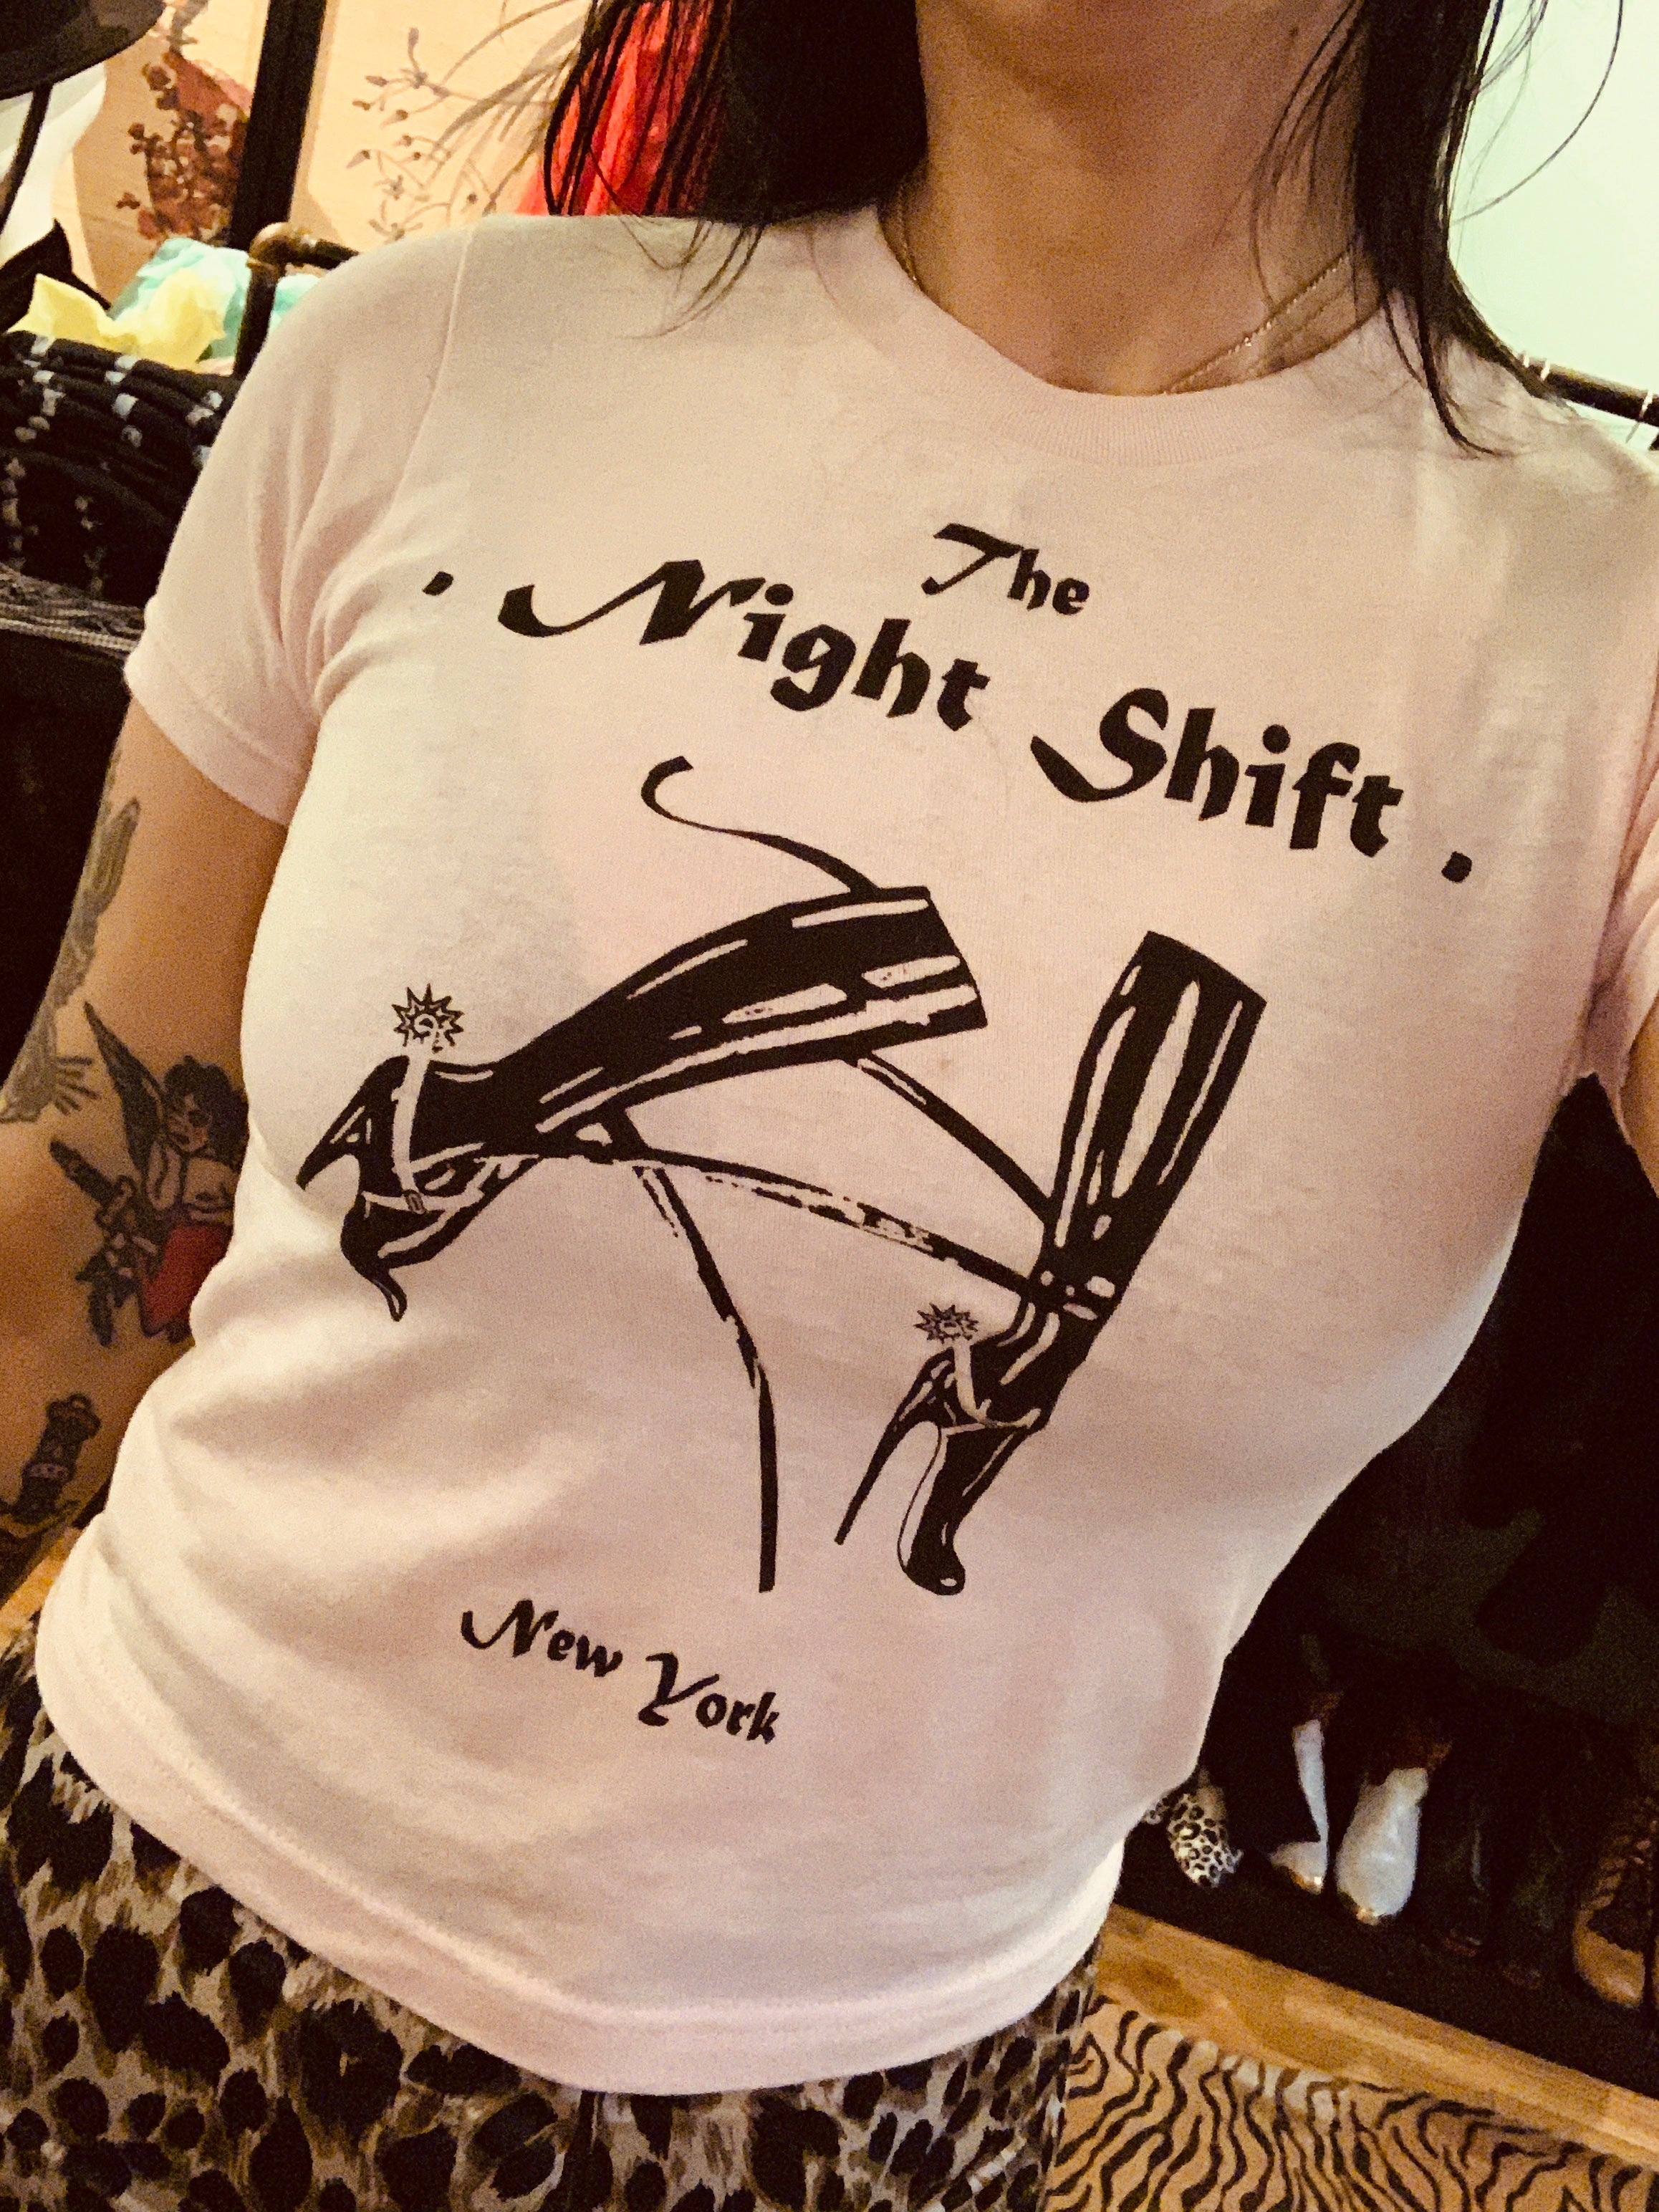 THE NIGHT SHIFT - Pale Pink Tee (Cropped)